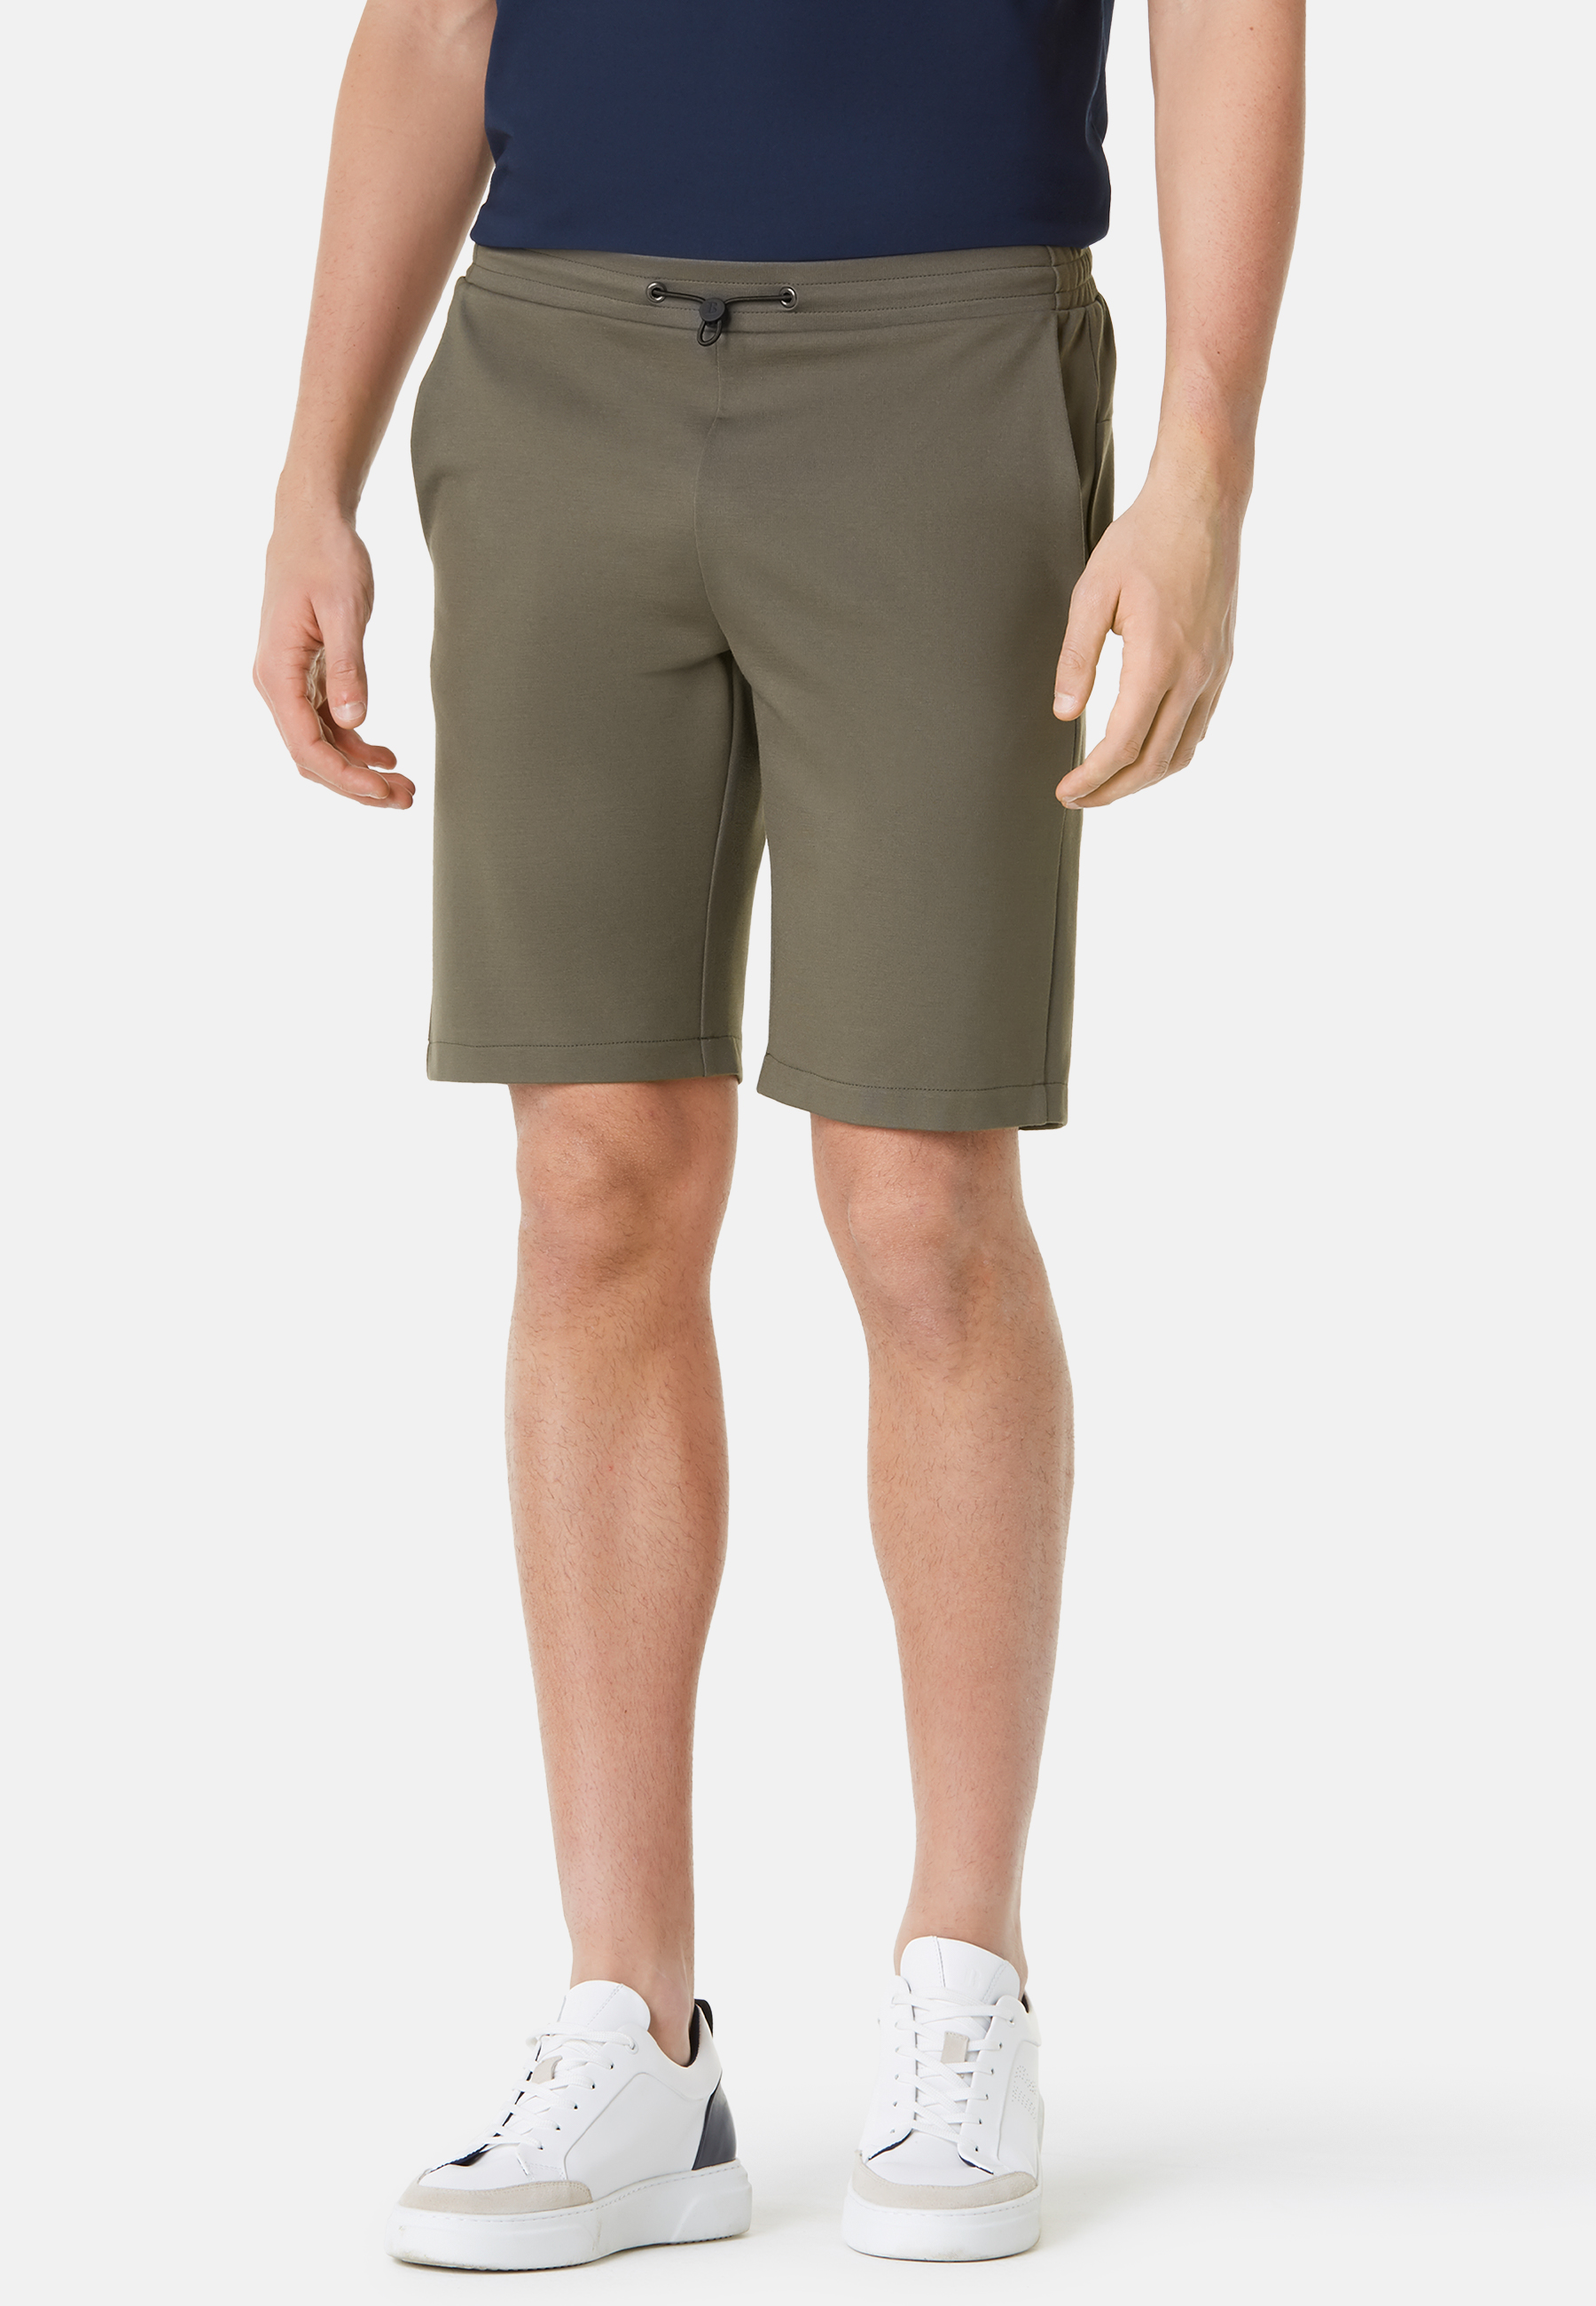 9 Crowns Mens Flat Front Modern fit Twill Chino Belted Shorts Essentials